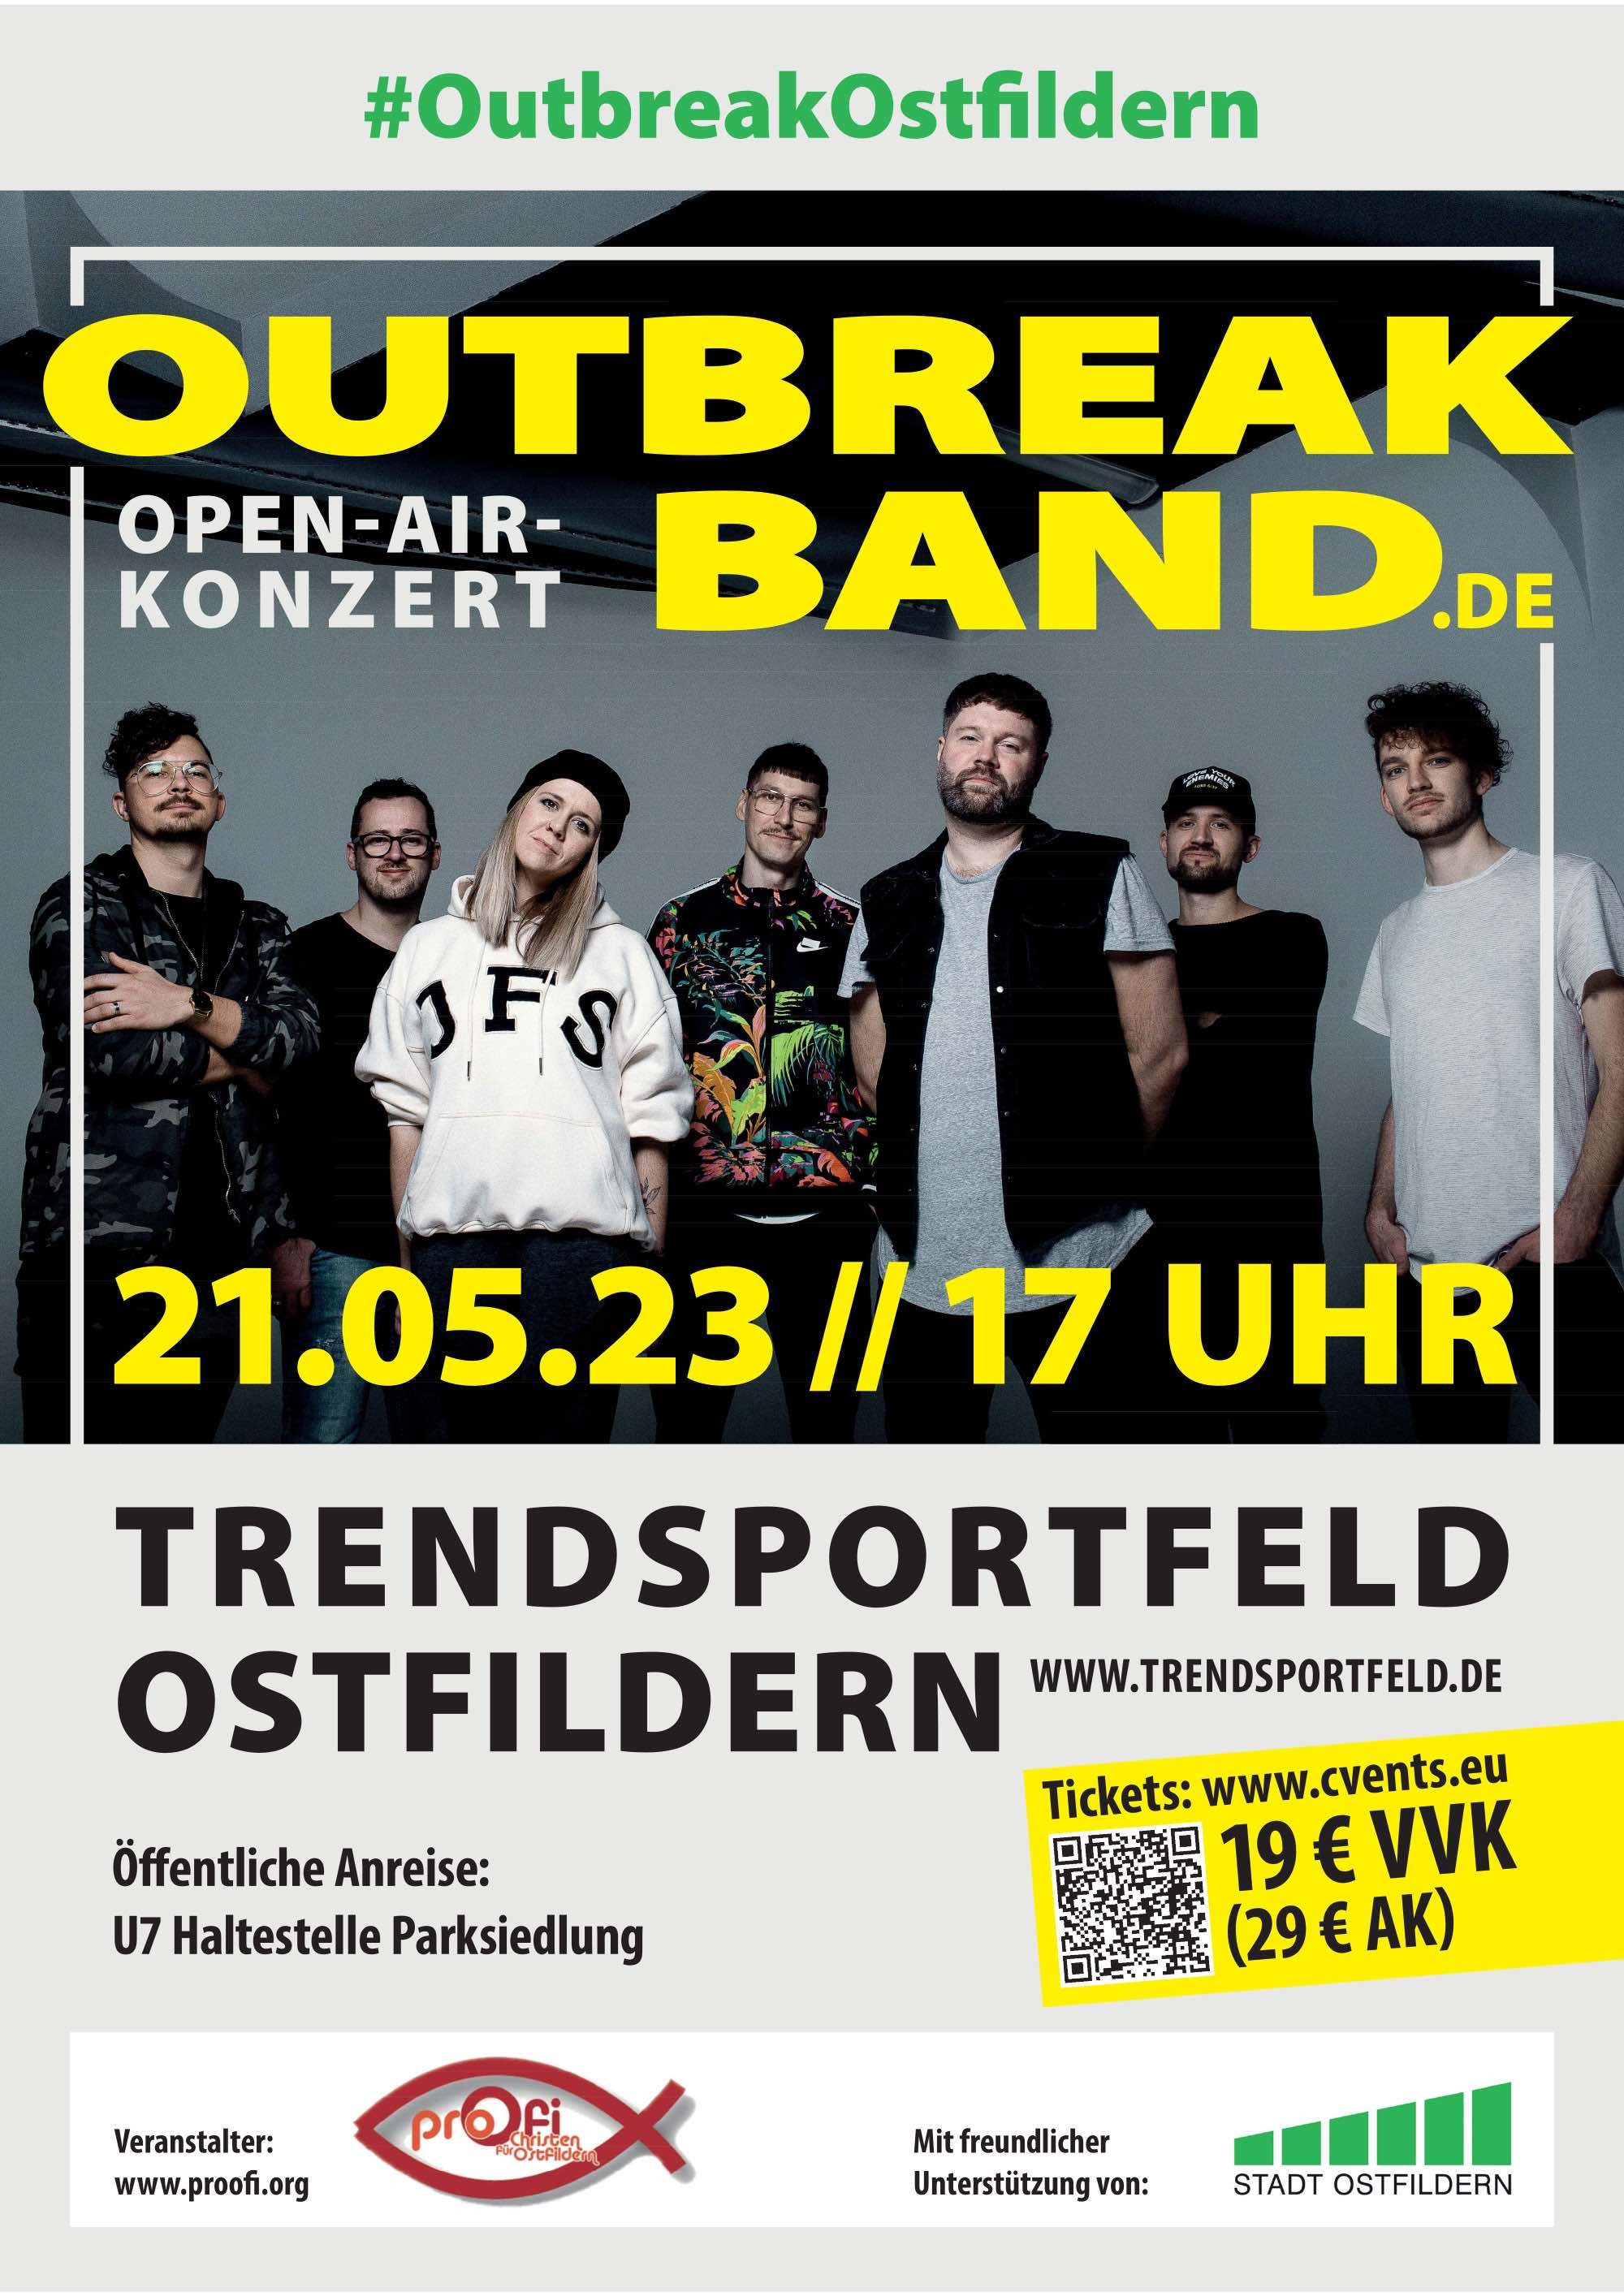 Outbreakband